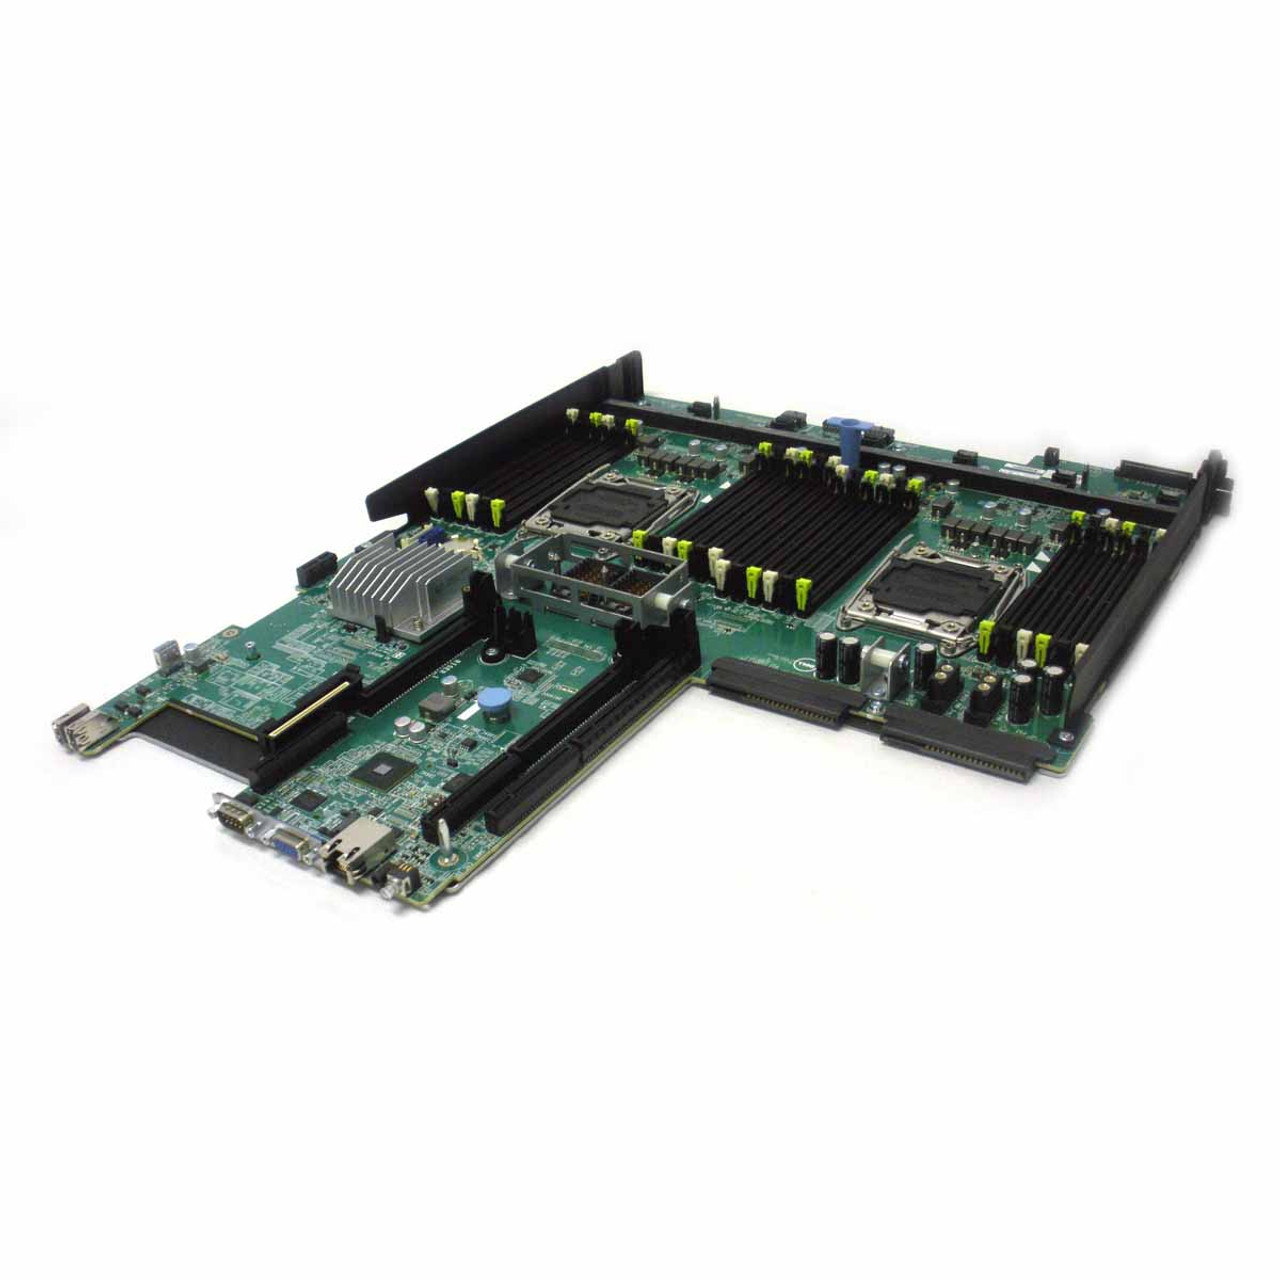 Buy a genuine refurbished Dell PowerEdge R830 Server Board at Flagship Technologies.